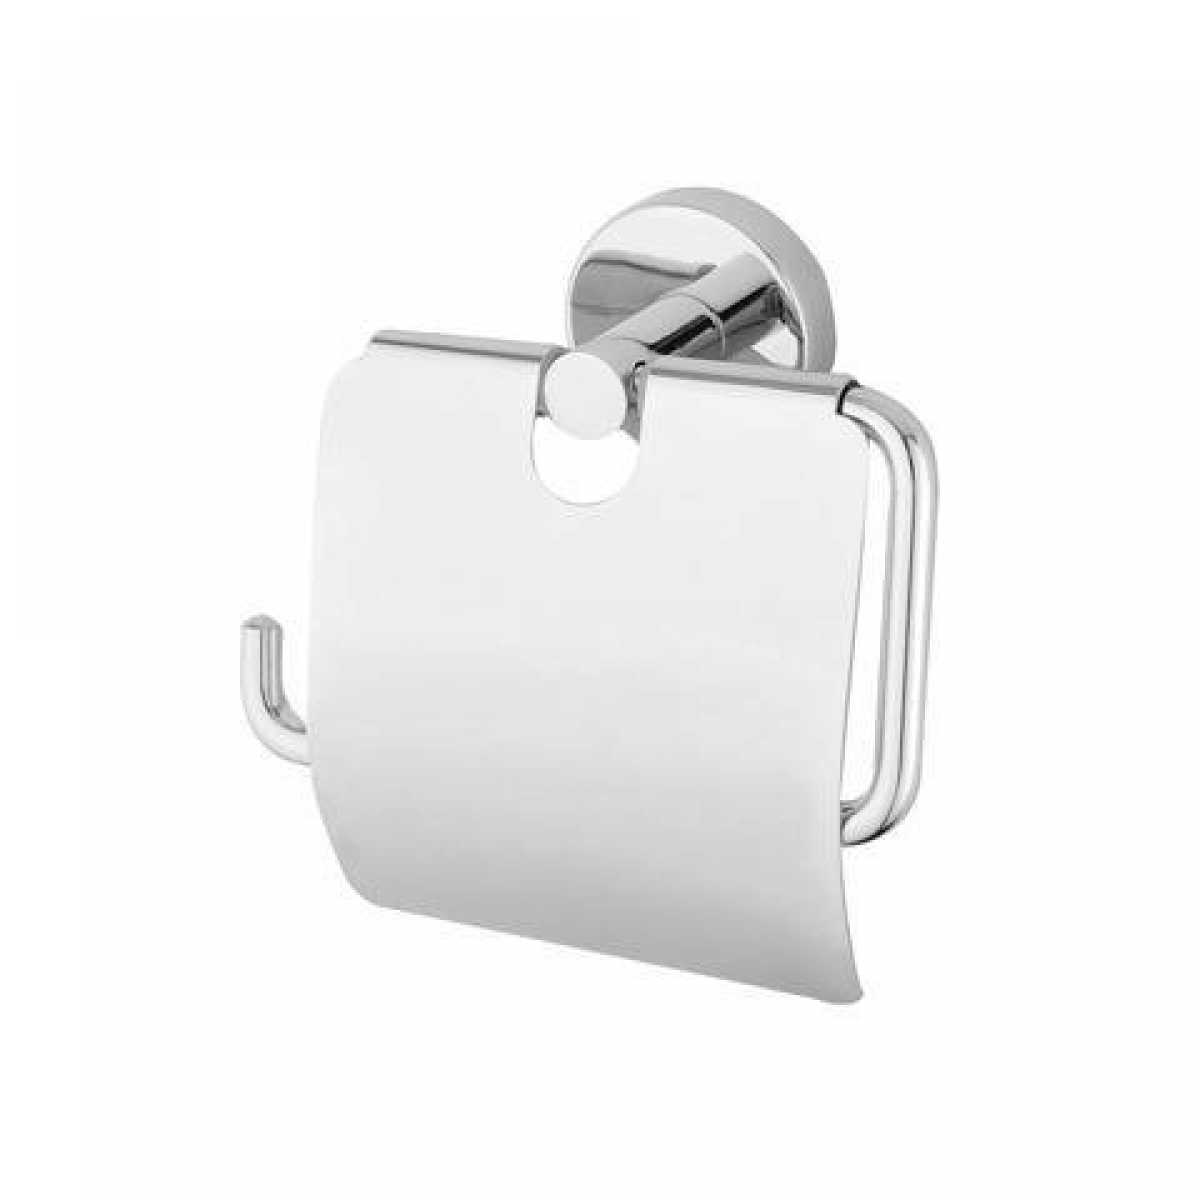 Toilet Roll Holder With Lid